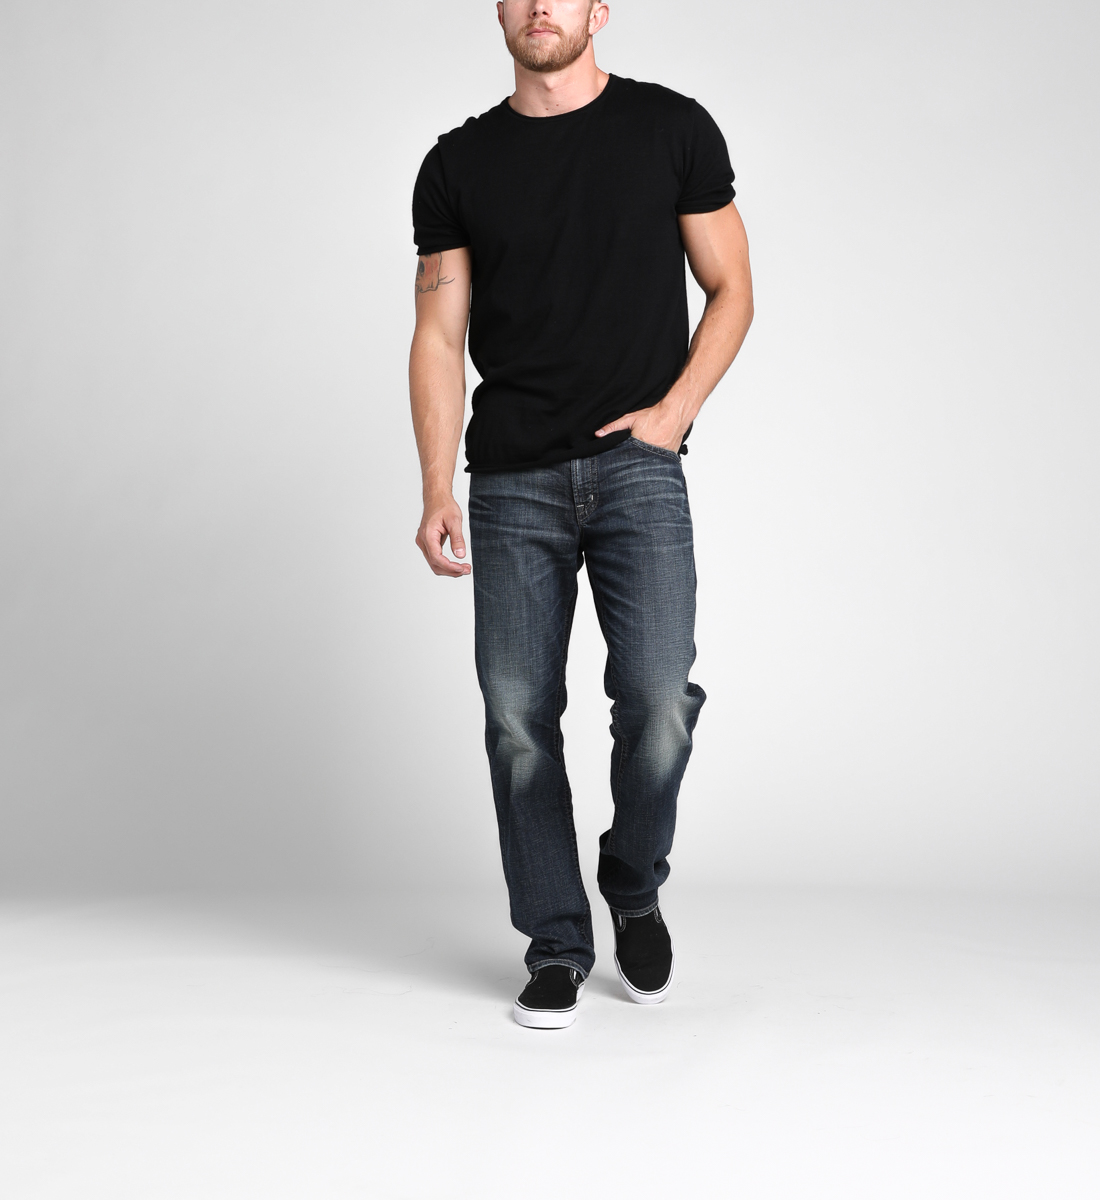 athletic fit tapered jeans